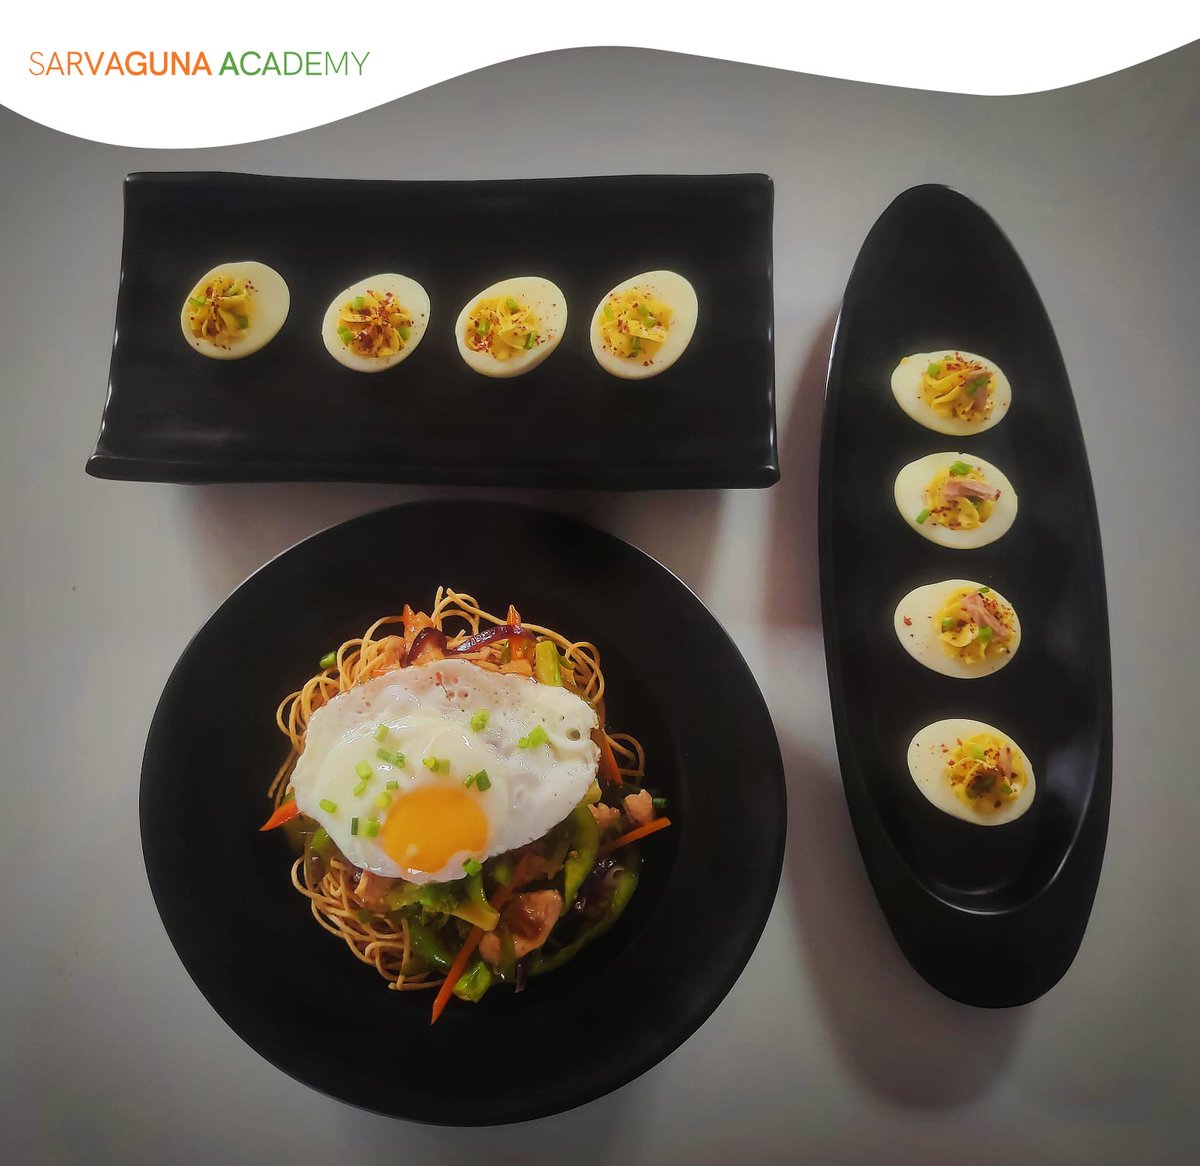 Our talented Sarvaguna Academy student brings her culinary skills to life in her practical session! 🍳✨ From learning to cooking, she’s mastered it all. Prepare to be impressed! Presenting Chopsuey and devils eggs 

#SarvagunaAcademy #CulinarySkills #StudentSuccess 🌟👩‍🍳